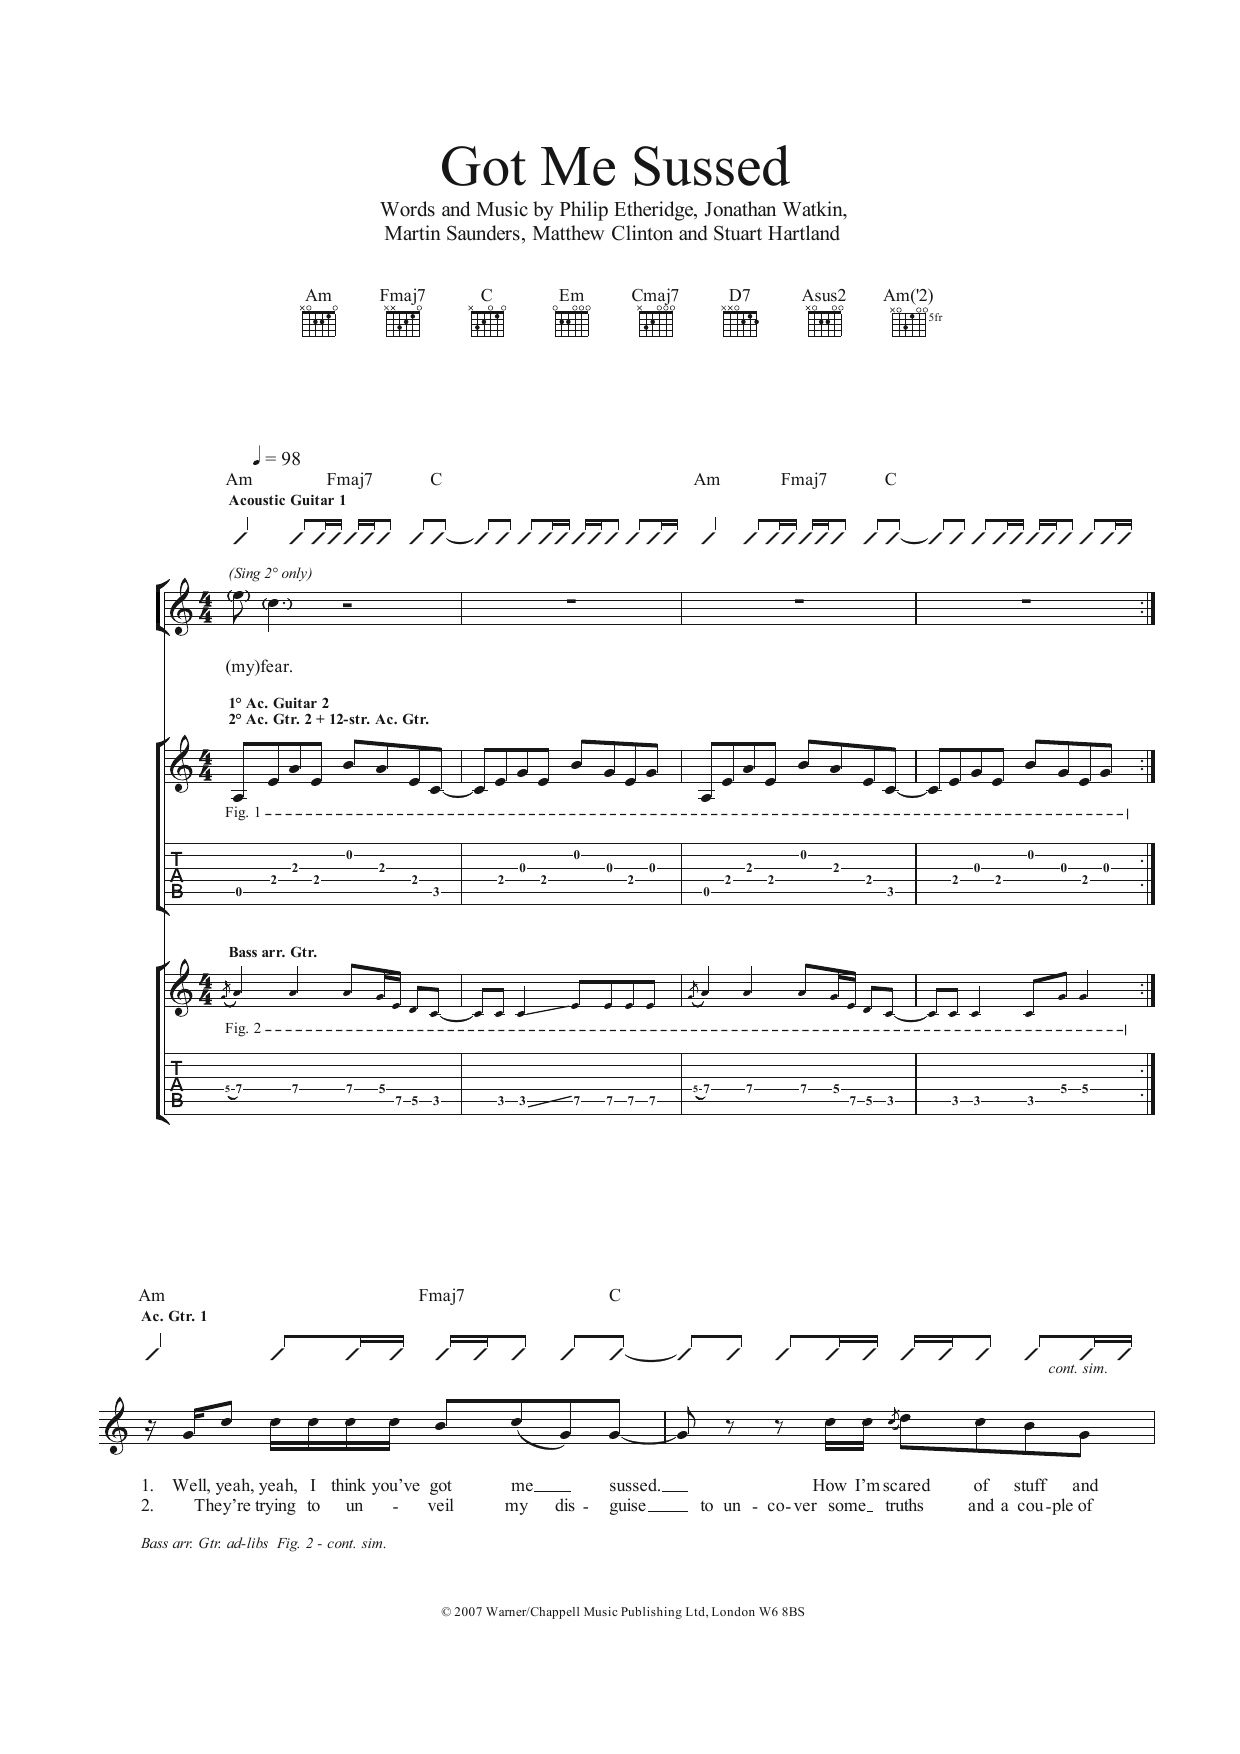 Download The Twang Got Me Sussed Sheet Music